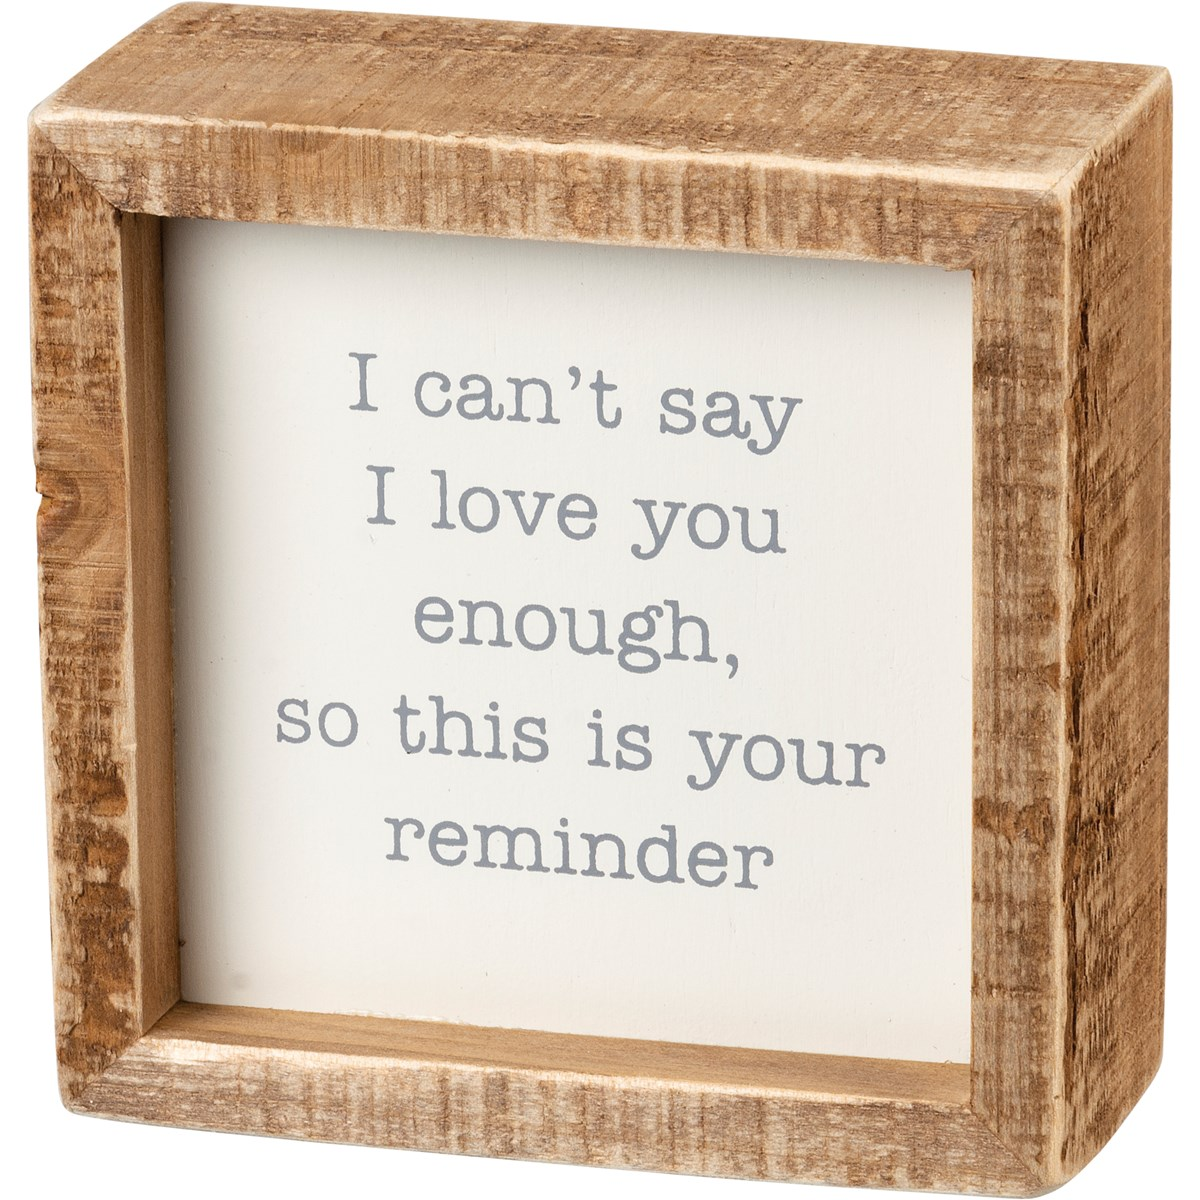 I Can't Say I Love You Enough 4" Inset Box Sign